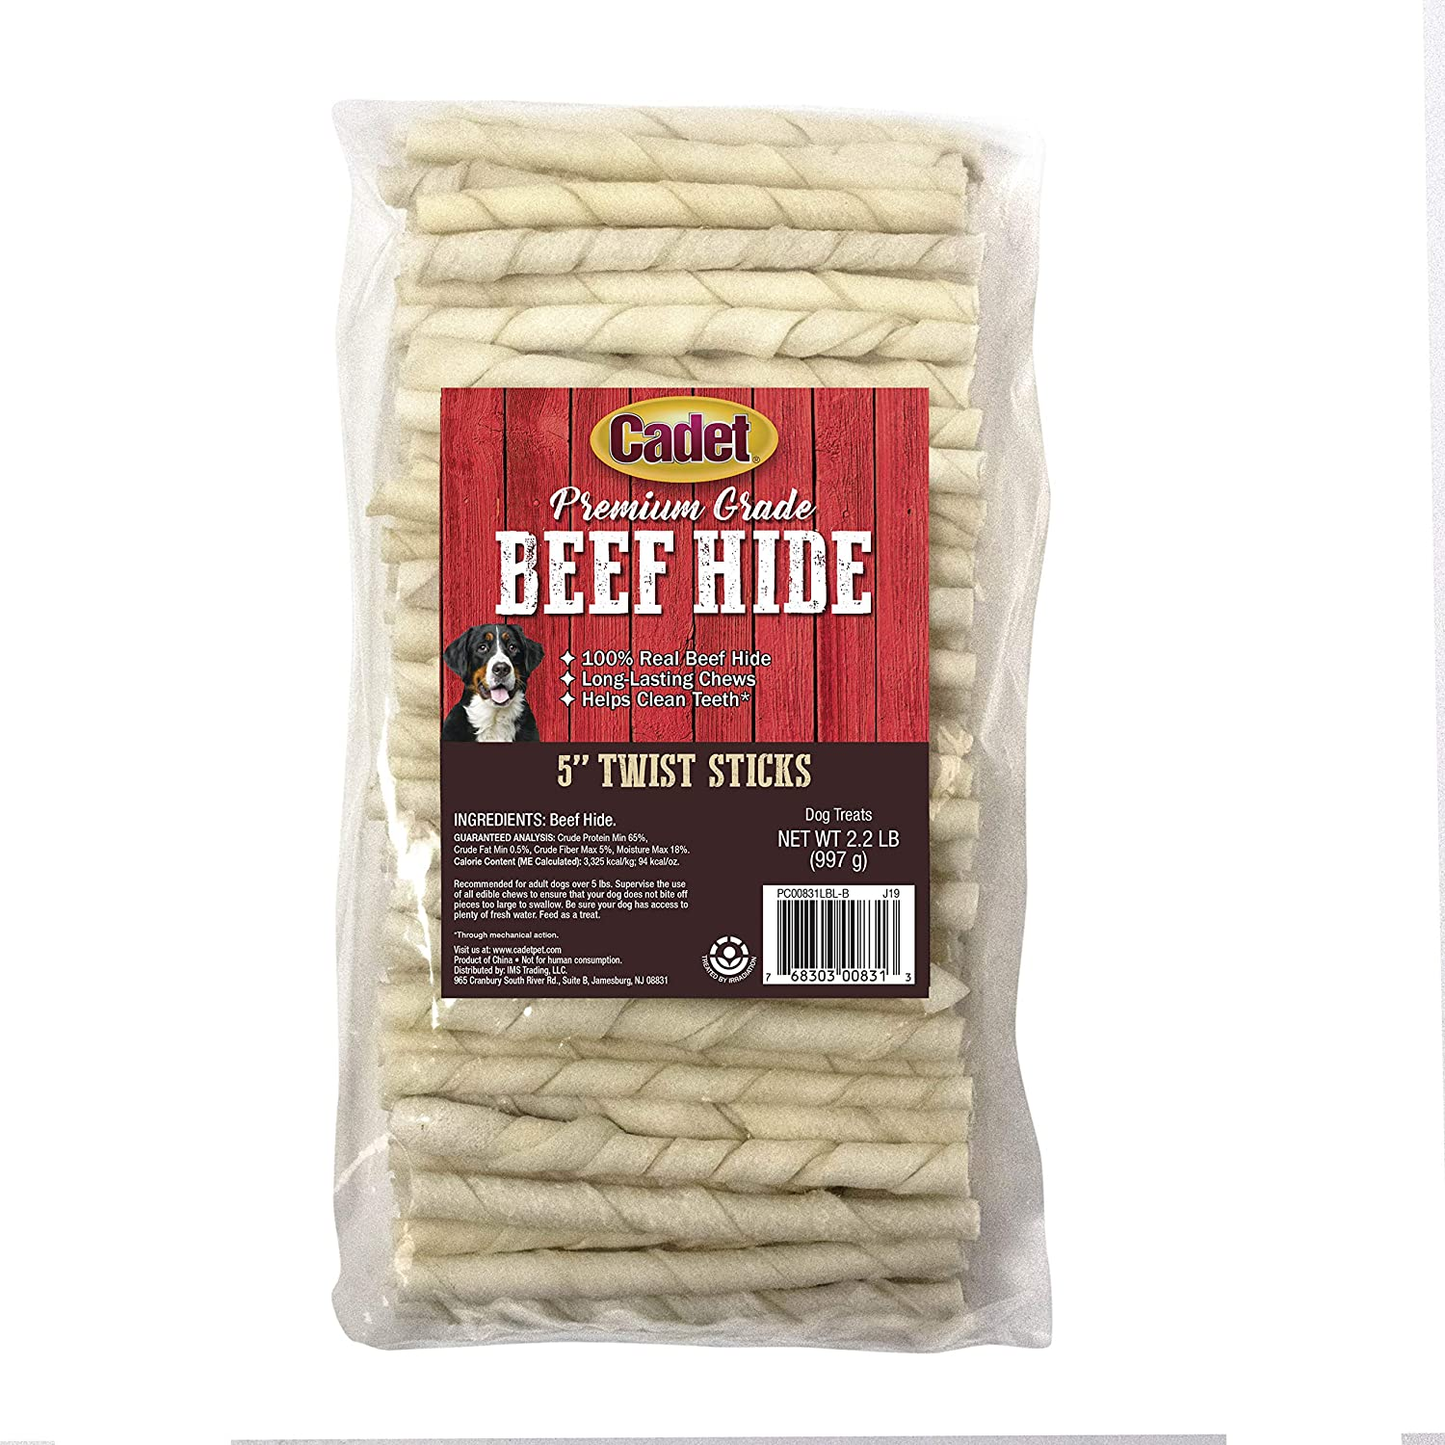 Premium Grade Beef Hide for Dogs, Rawhide Long Lasting Dog Chews, Chips, Curls & Rolls for Small/Medium/Large Dogs